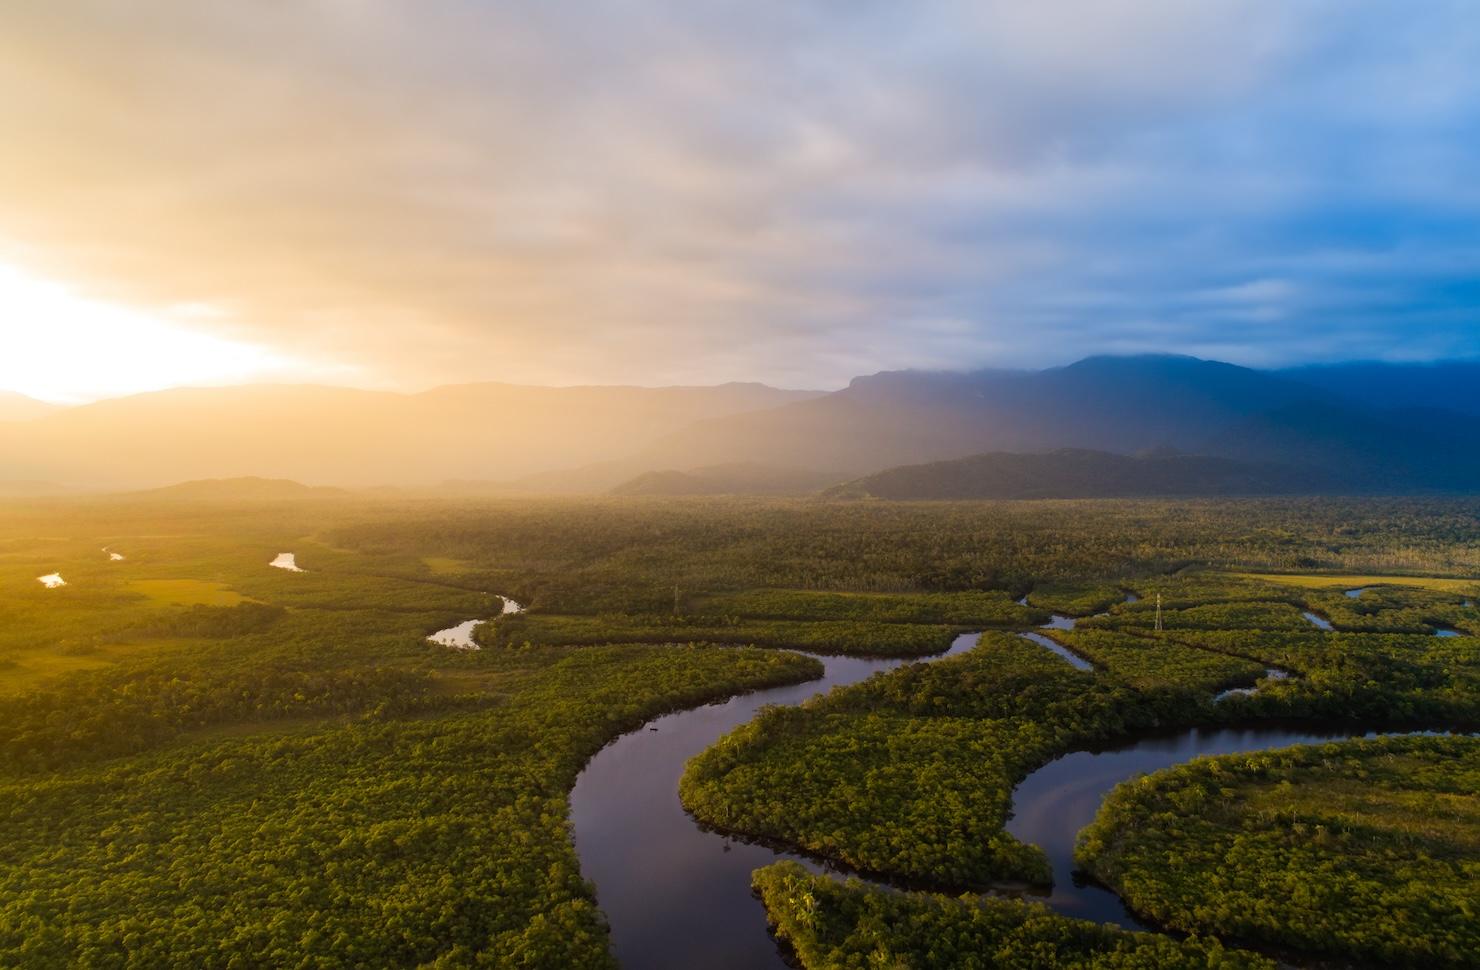 An image showing sunrise over the Amazon rain forest